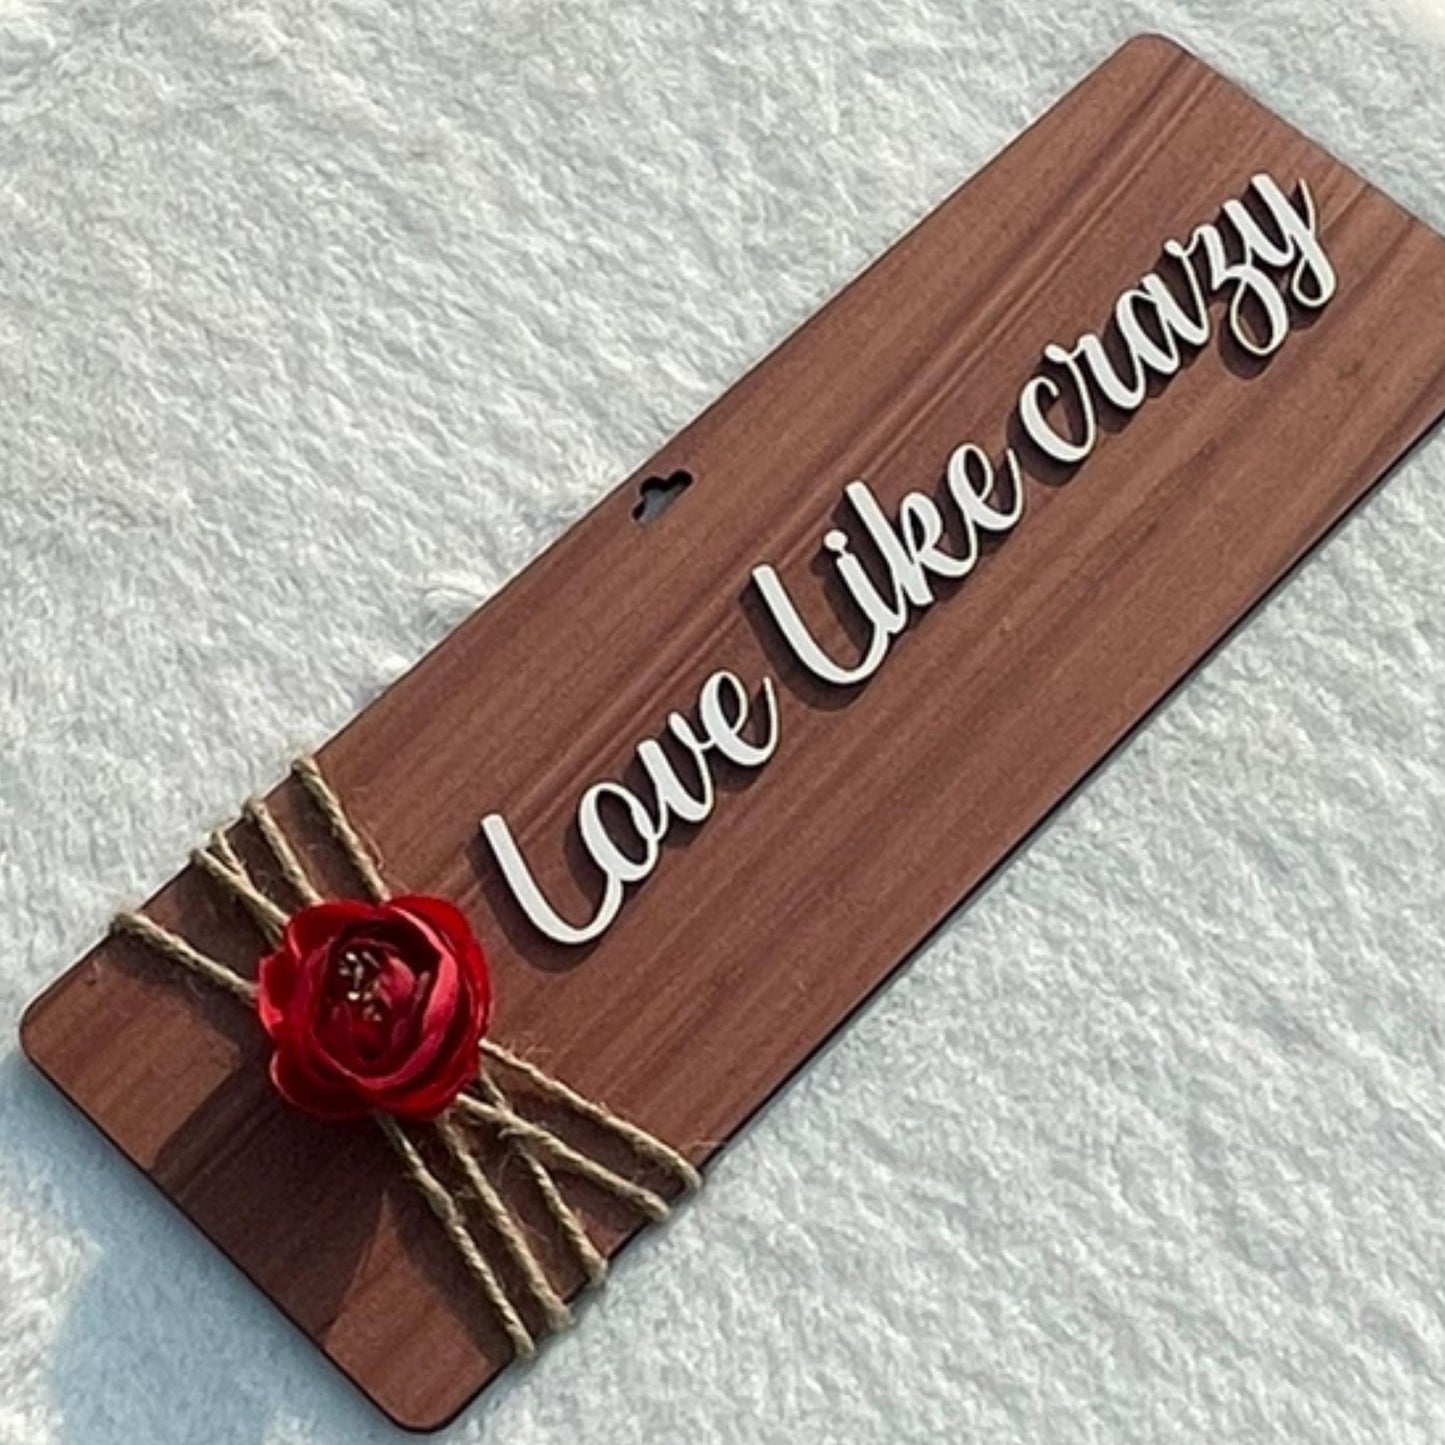 Love Like Crazy Wooden Wall Art With Rose